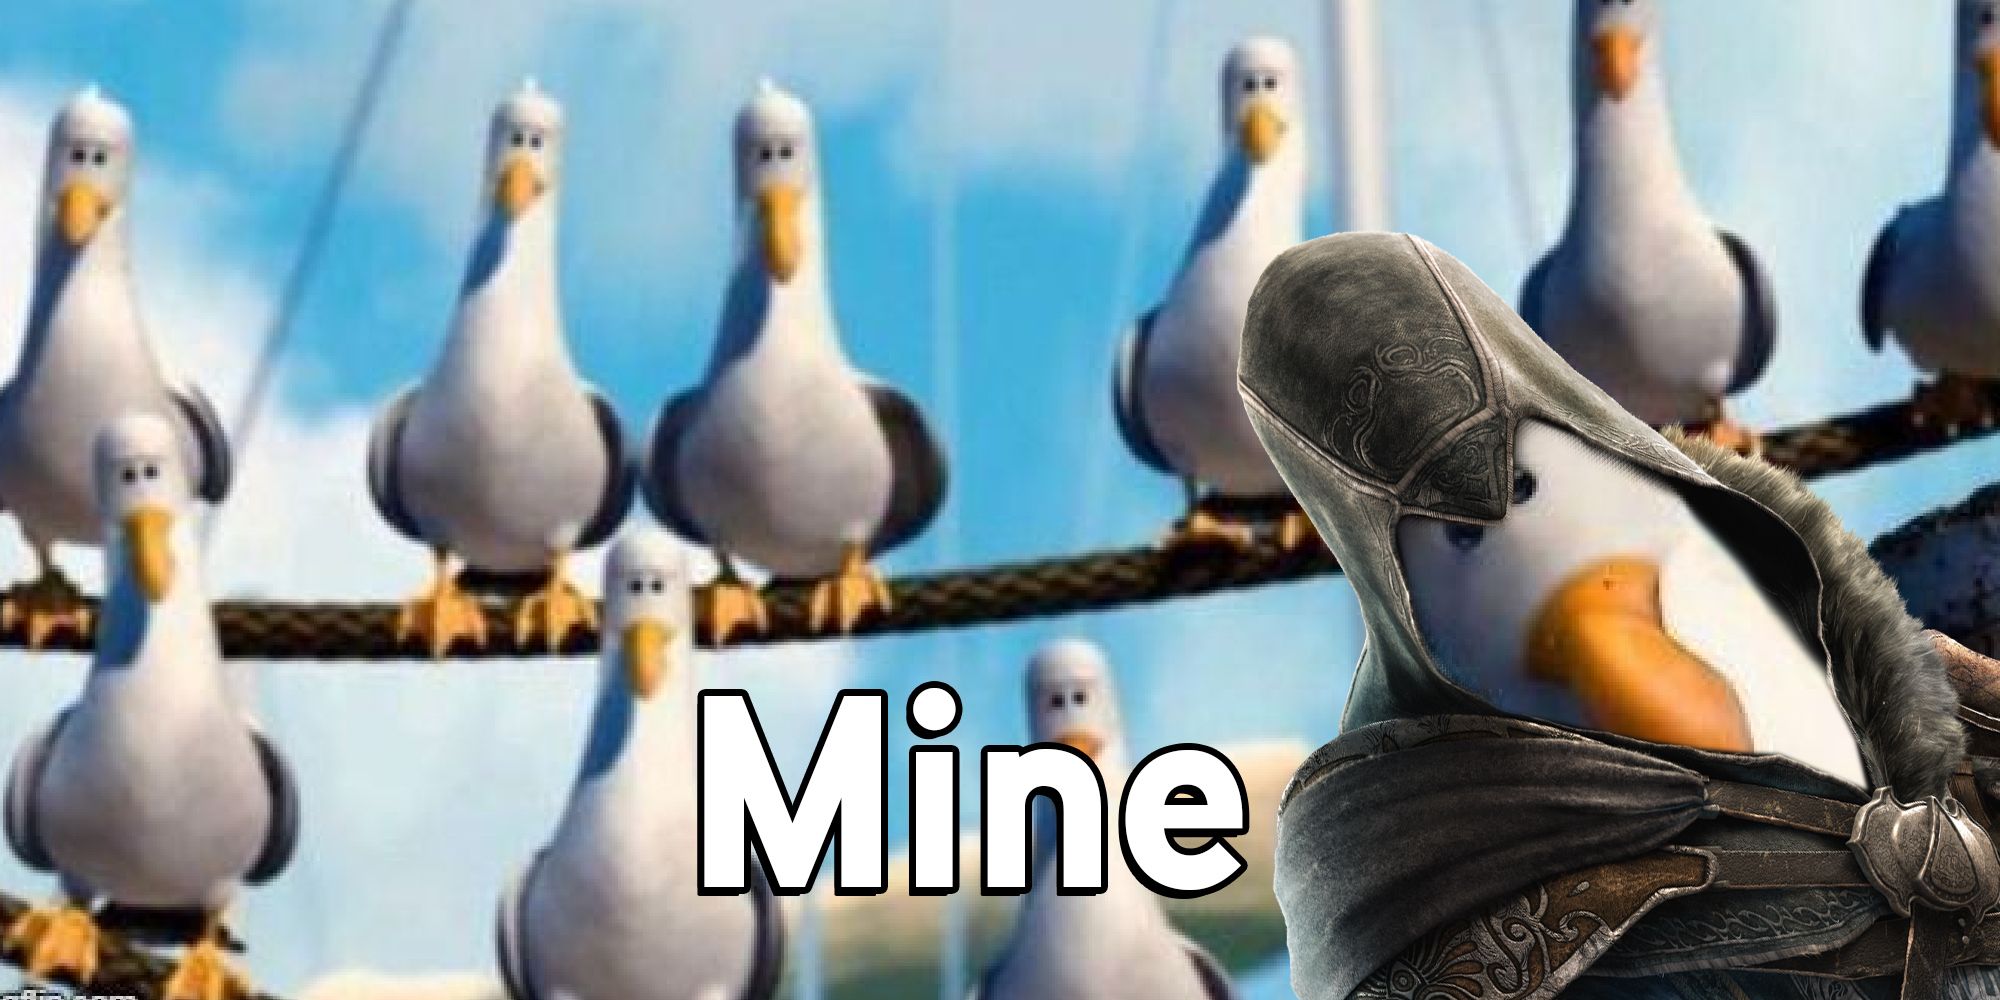 Ubisoft Mine - seagulls from finding nemo cosplaying as assassin's creed